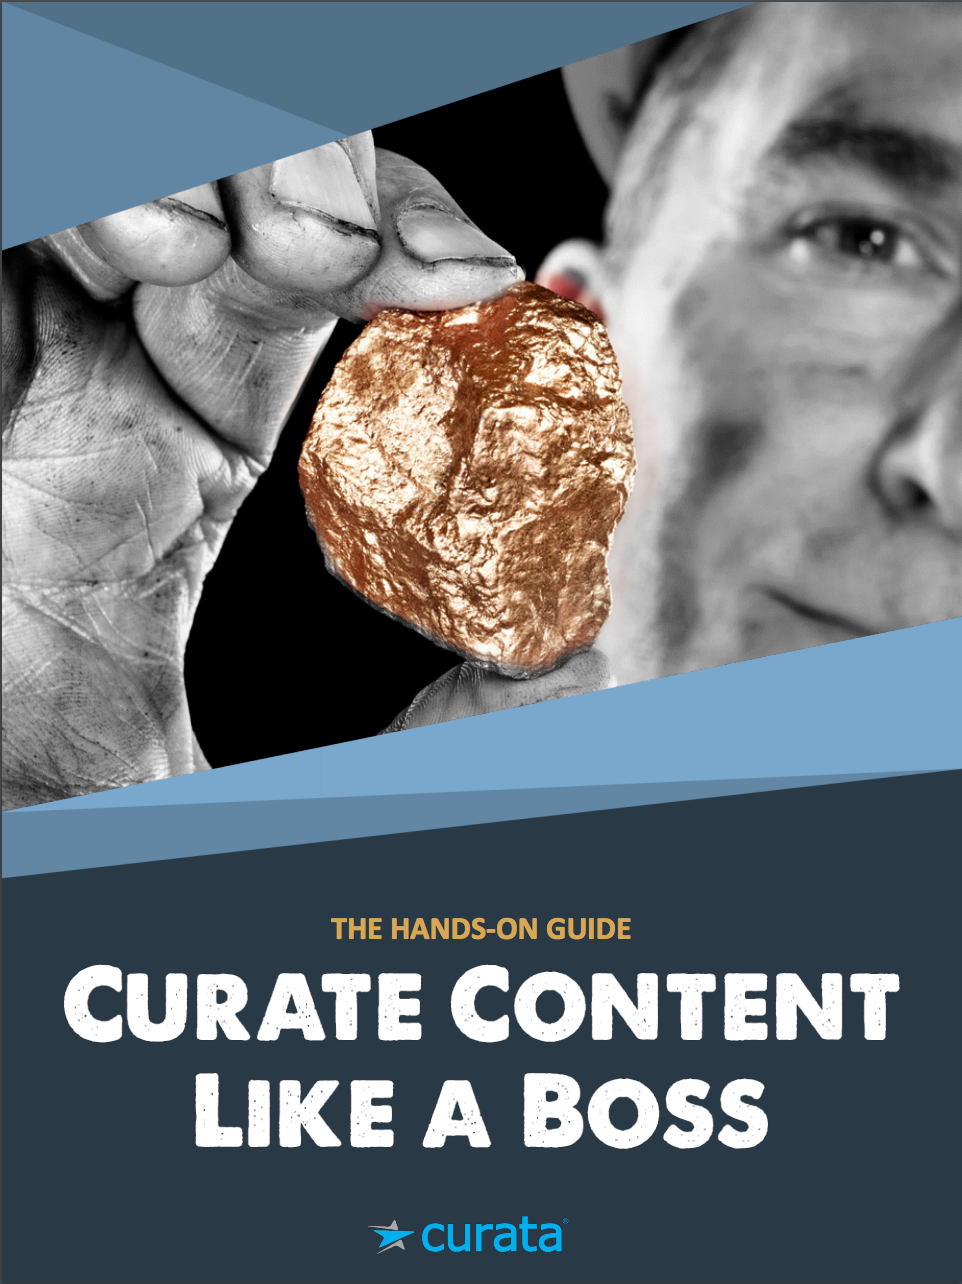 The Hands-on Guide: Curate Content Like a Boss